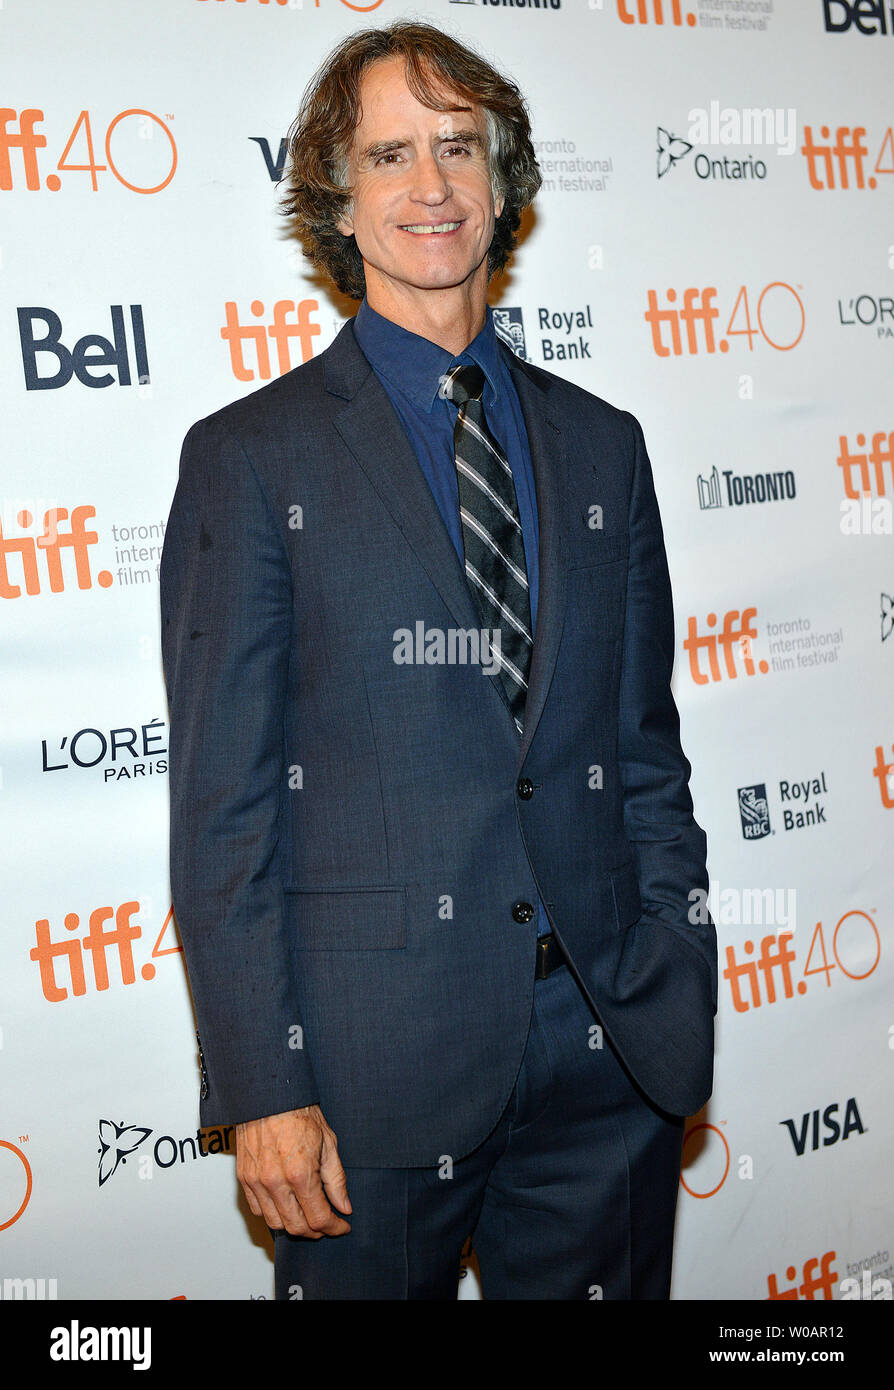 Director Jay Roach arrives at the world premiere of 'Trumbo' at the Elgin Theatre during the Toronto International Film Festival in Toronto, Canada on September 12, 2015. Photo by Christine Chew/UPI Stock Photo